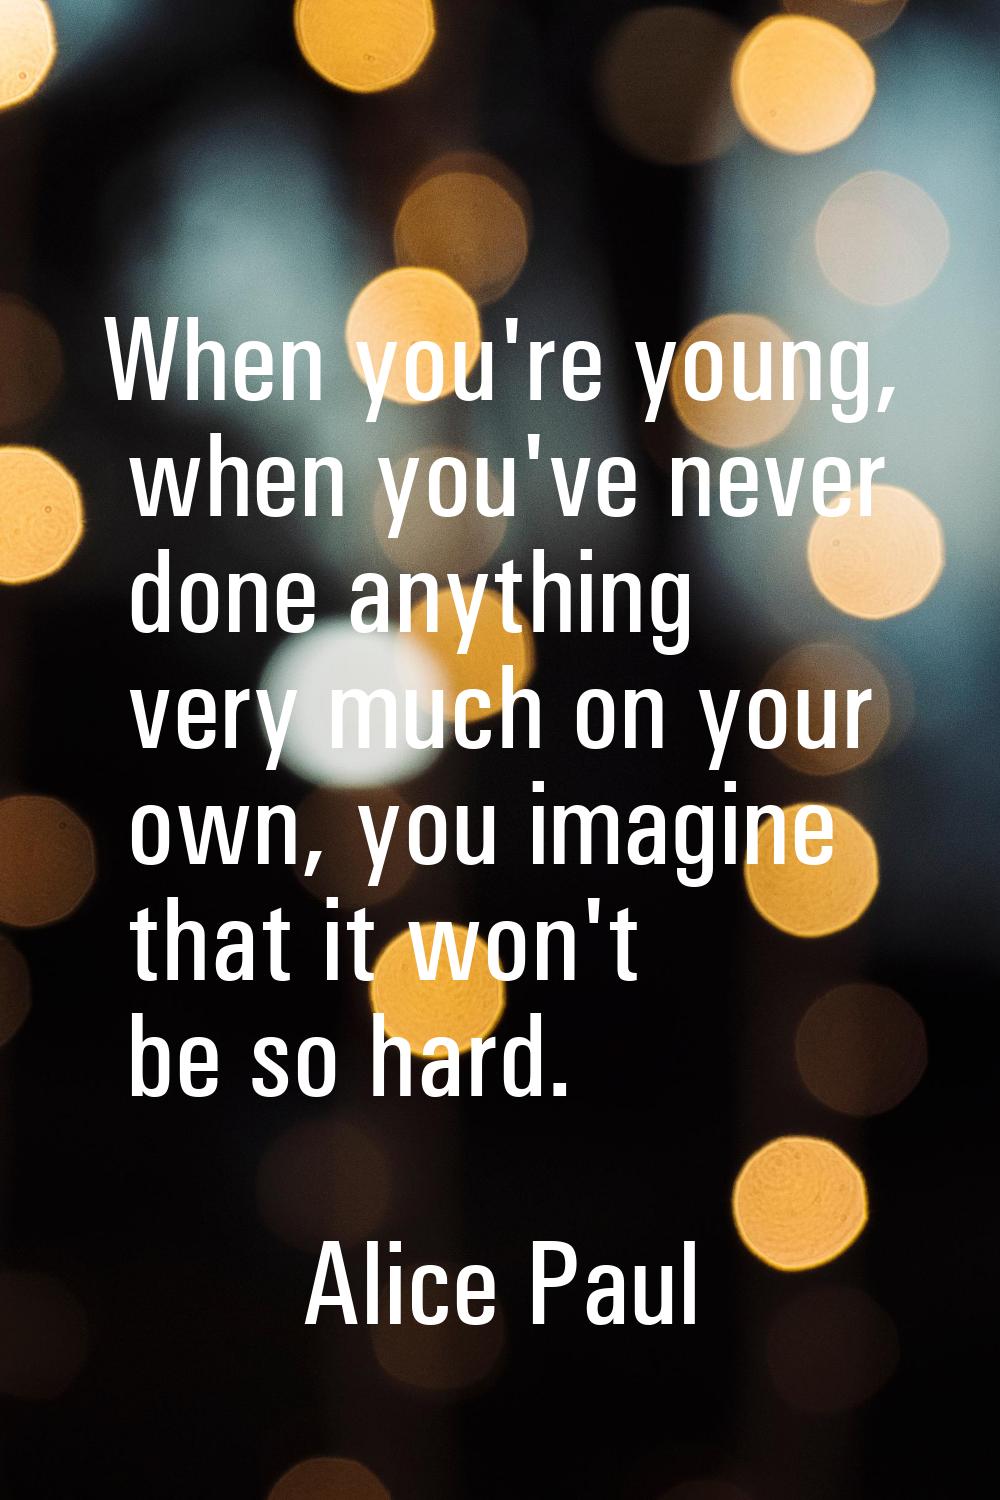 When you're young, when you've never done anything very much on your own, you imagine that it won't